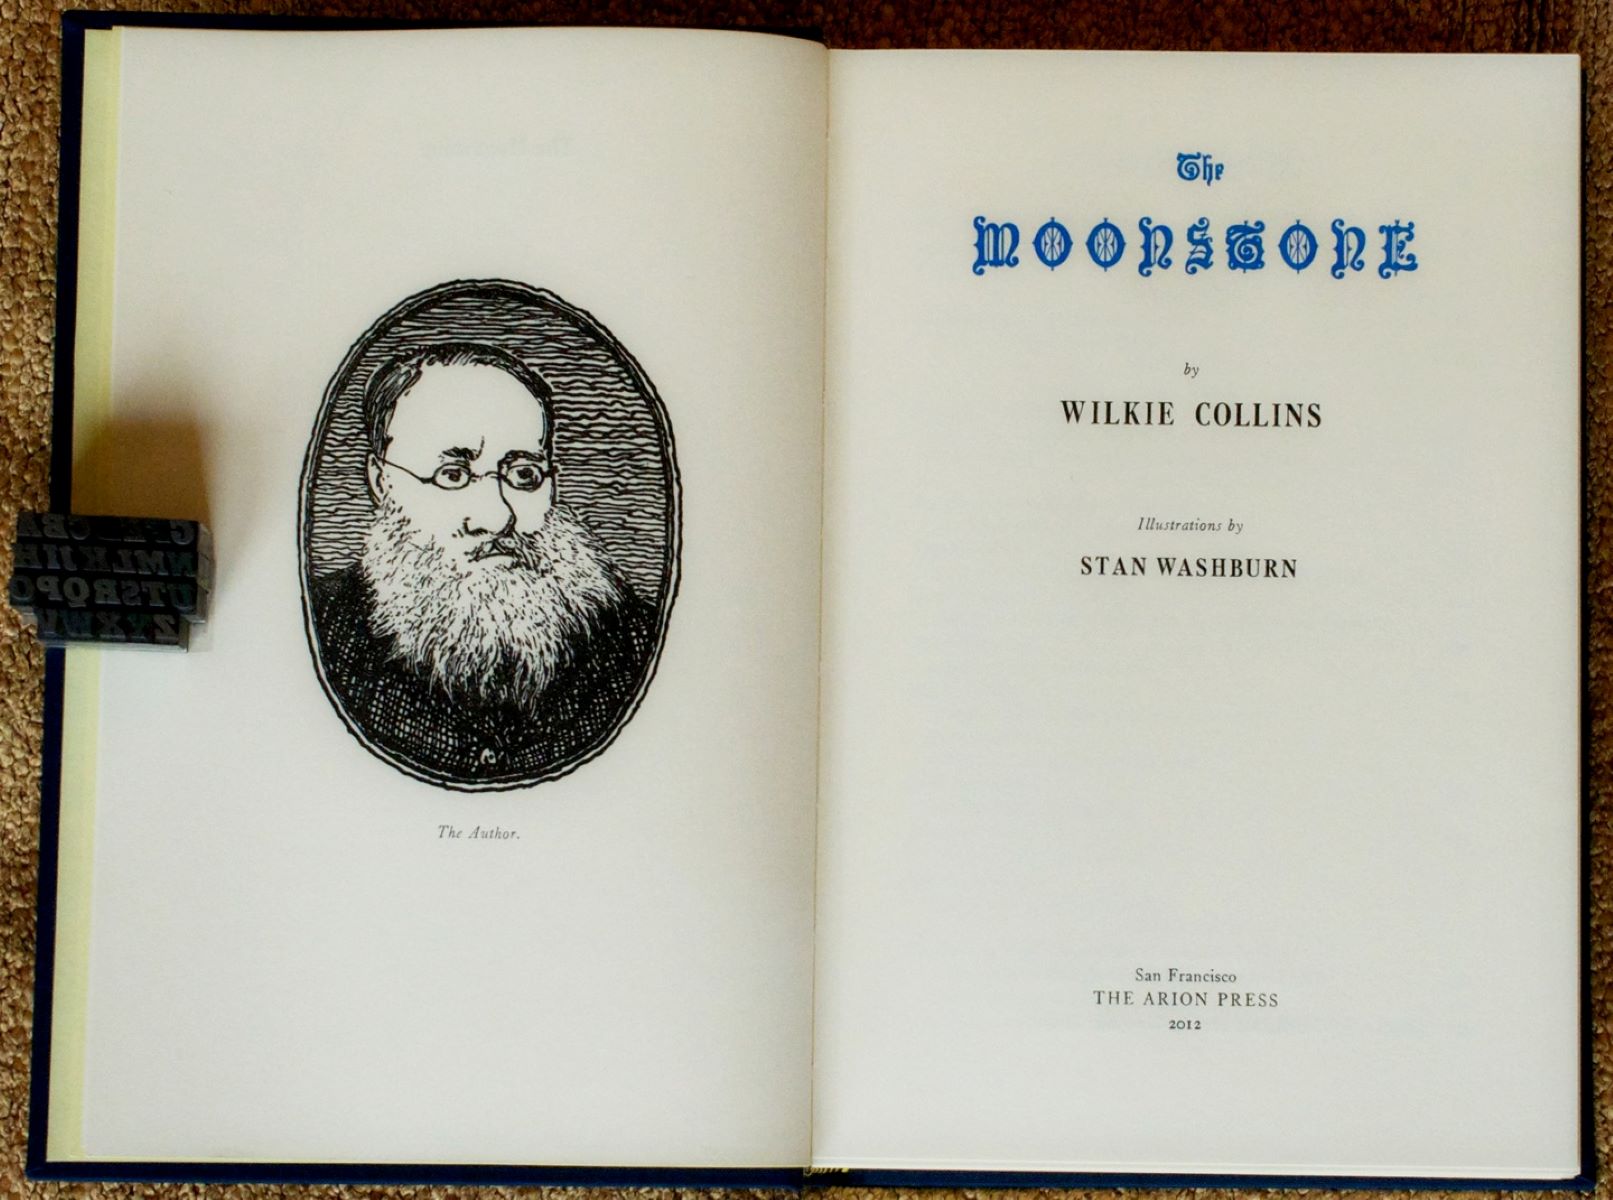 20 Astonishing Facts About The Moonstone - Wilkie Collins - Facts.net